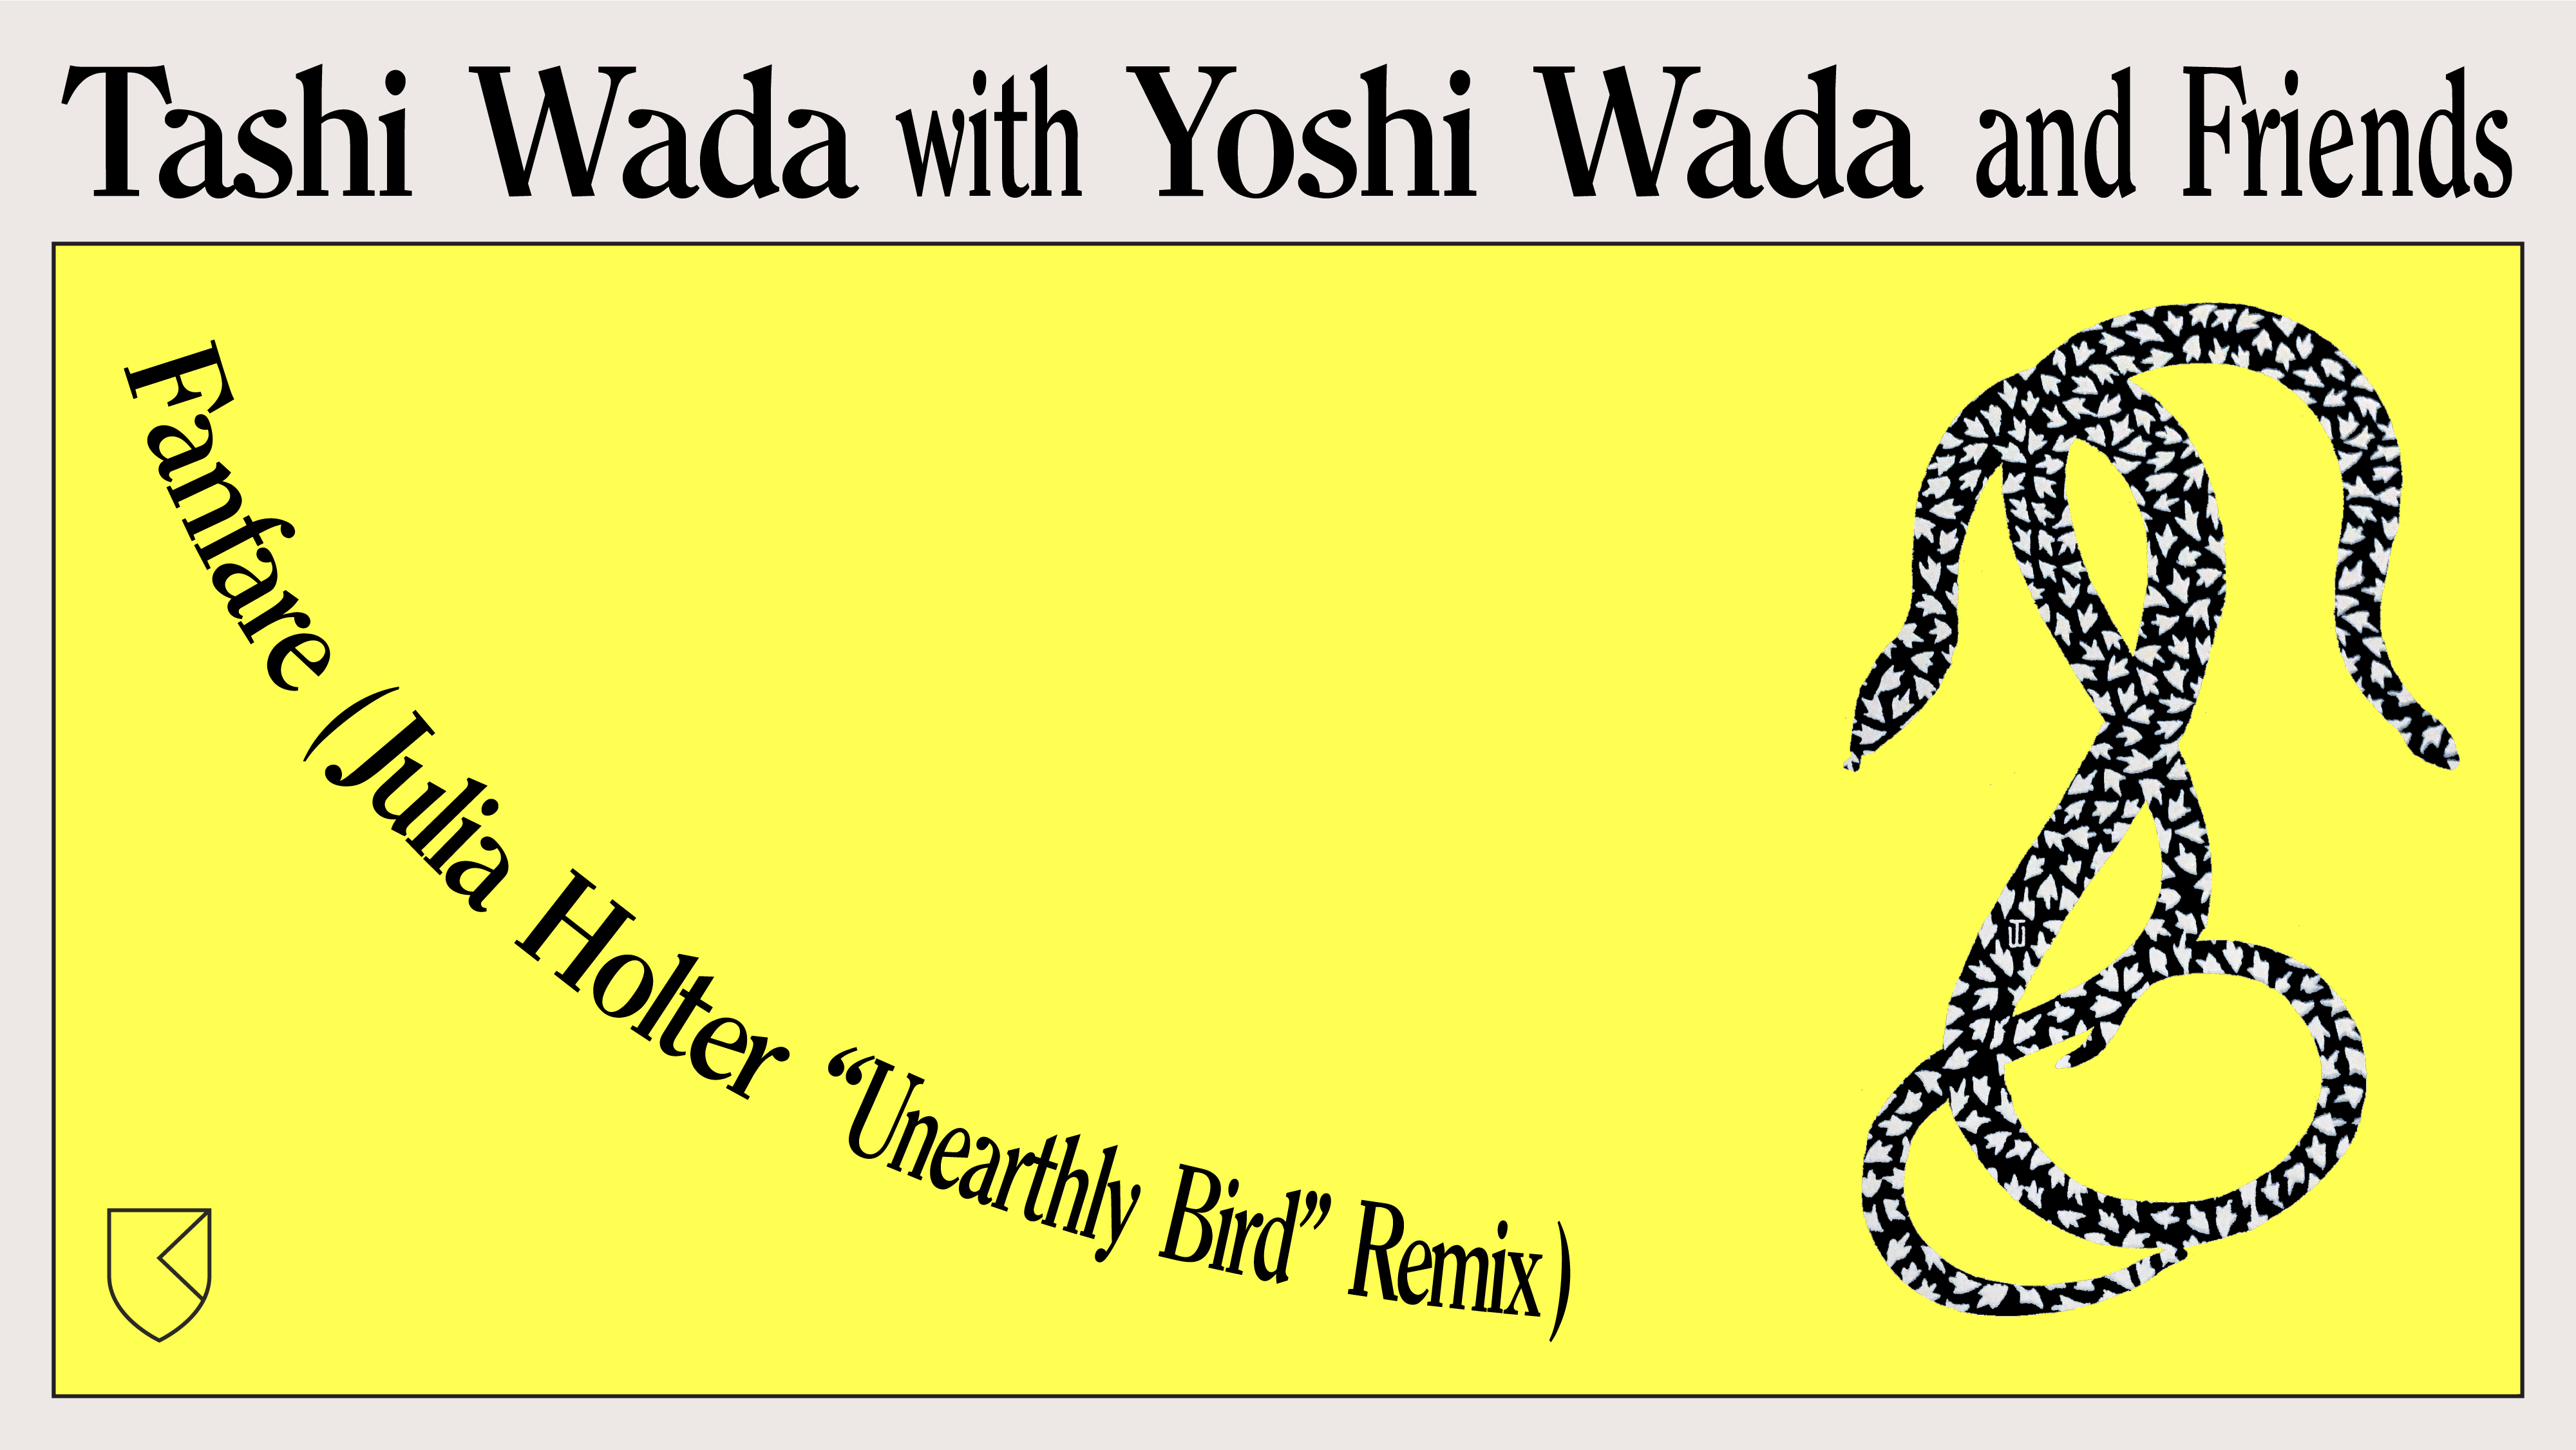 Link to Video for Tashi Wada with Yoshi Wada and Friends – Fanfare (Julia Holter “Unearthly Bird” Remix)